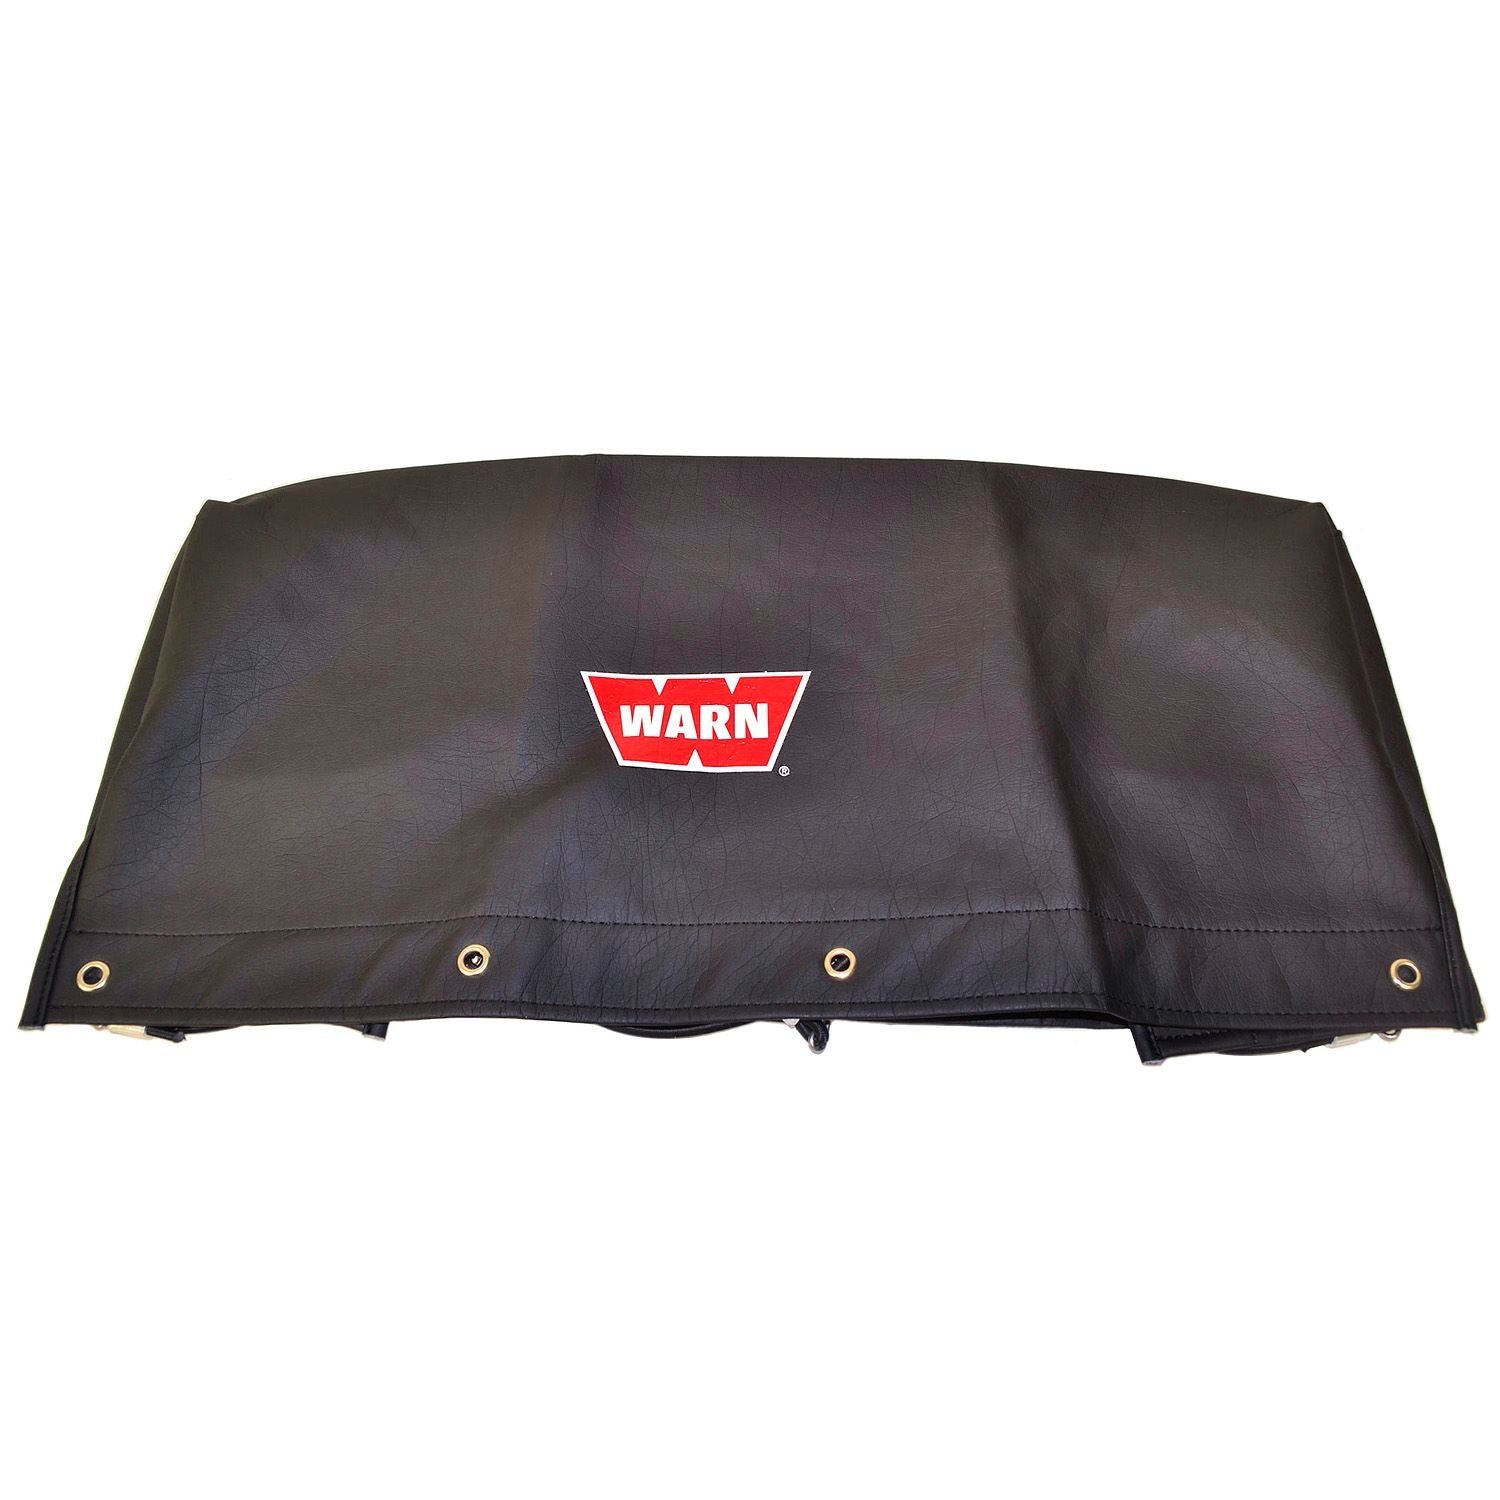 WARN Soft Winch Cover for 16.5ti, M15000 and M12000